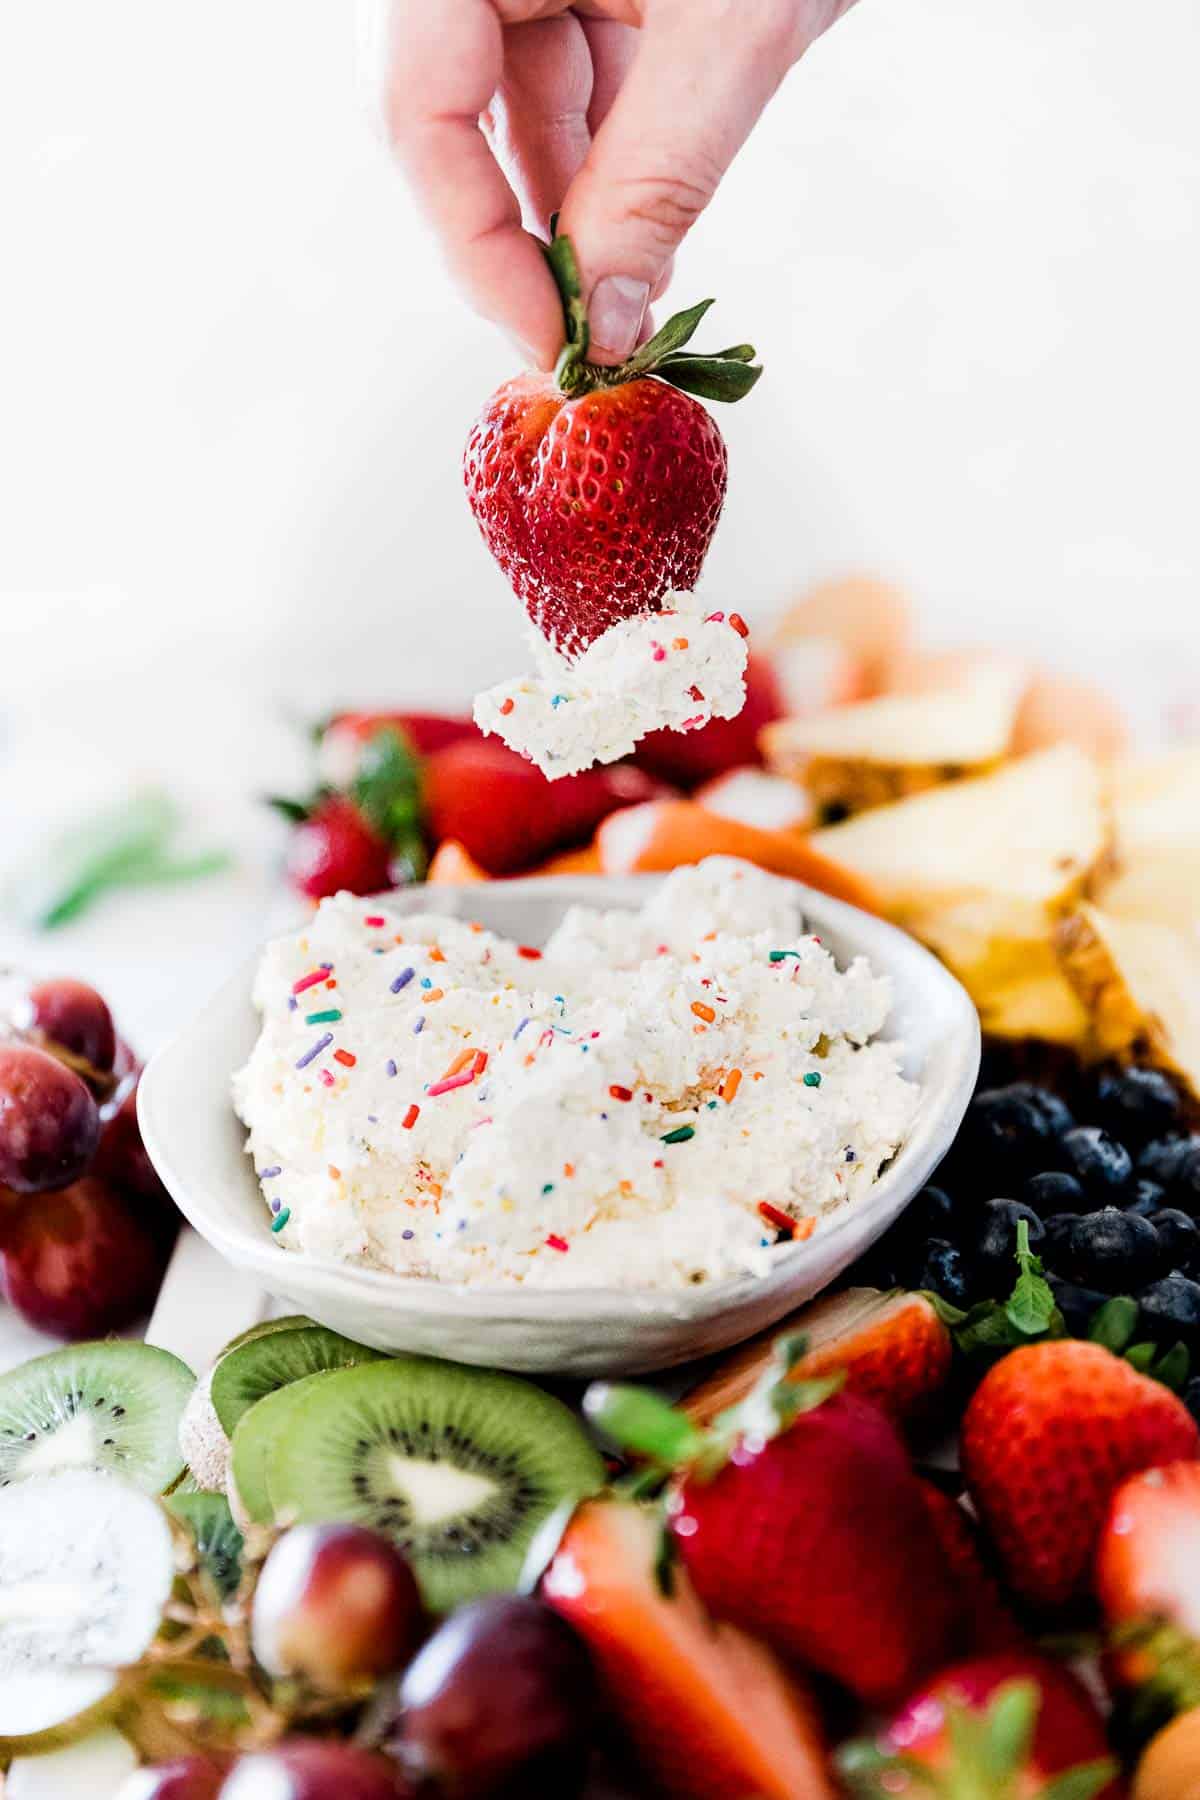 A strawberry being dipped into cake batter dip.